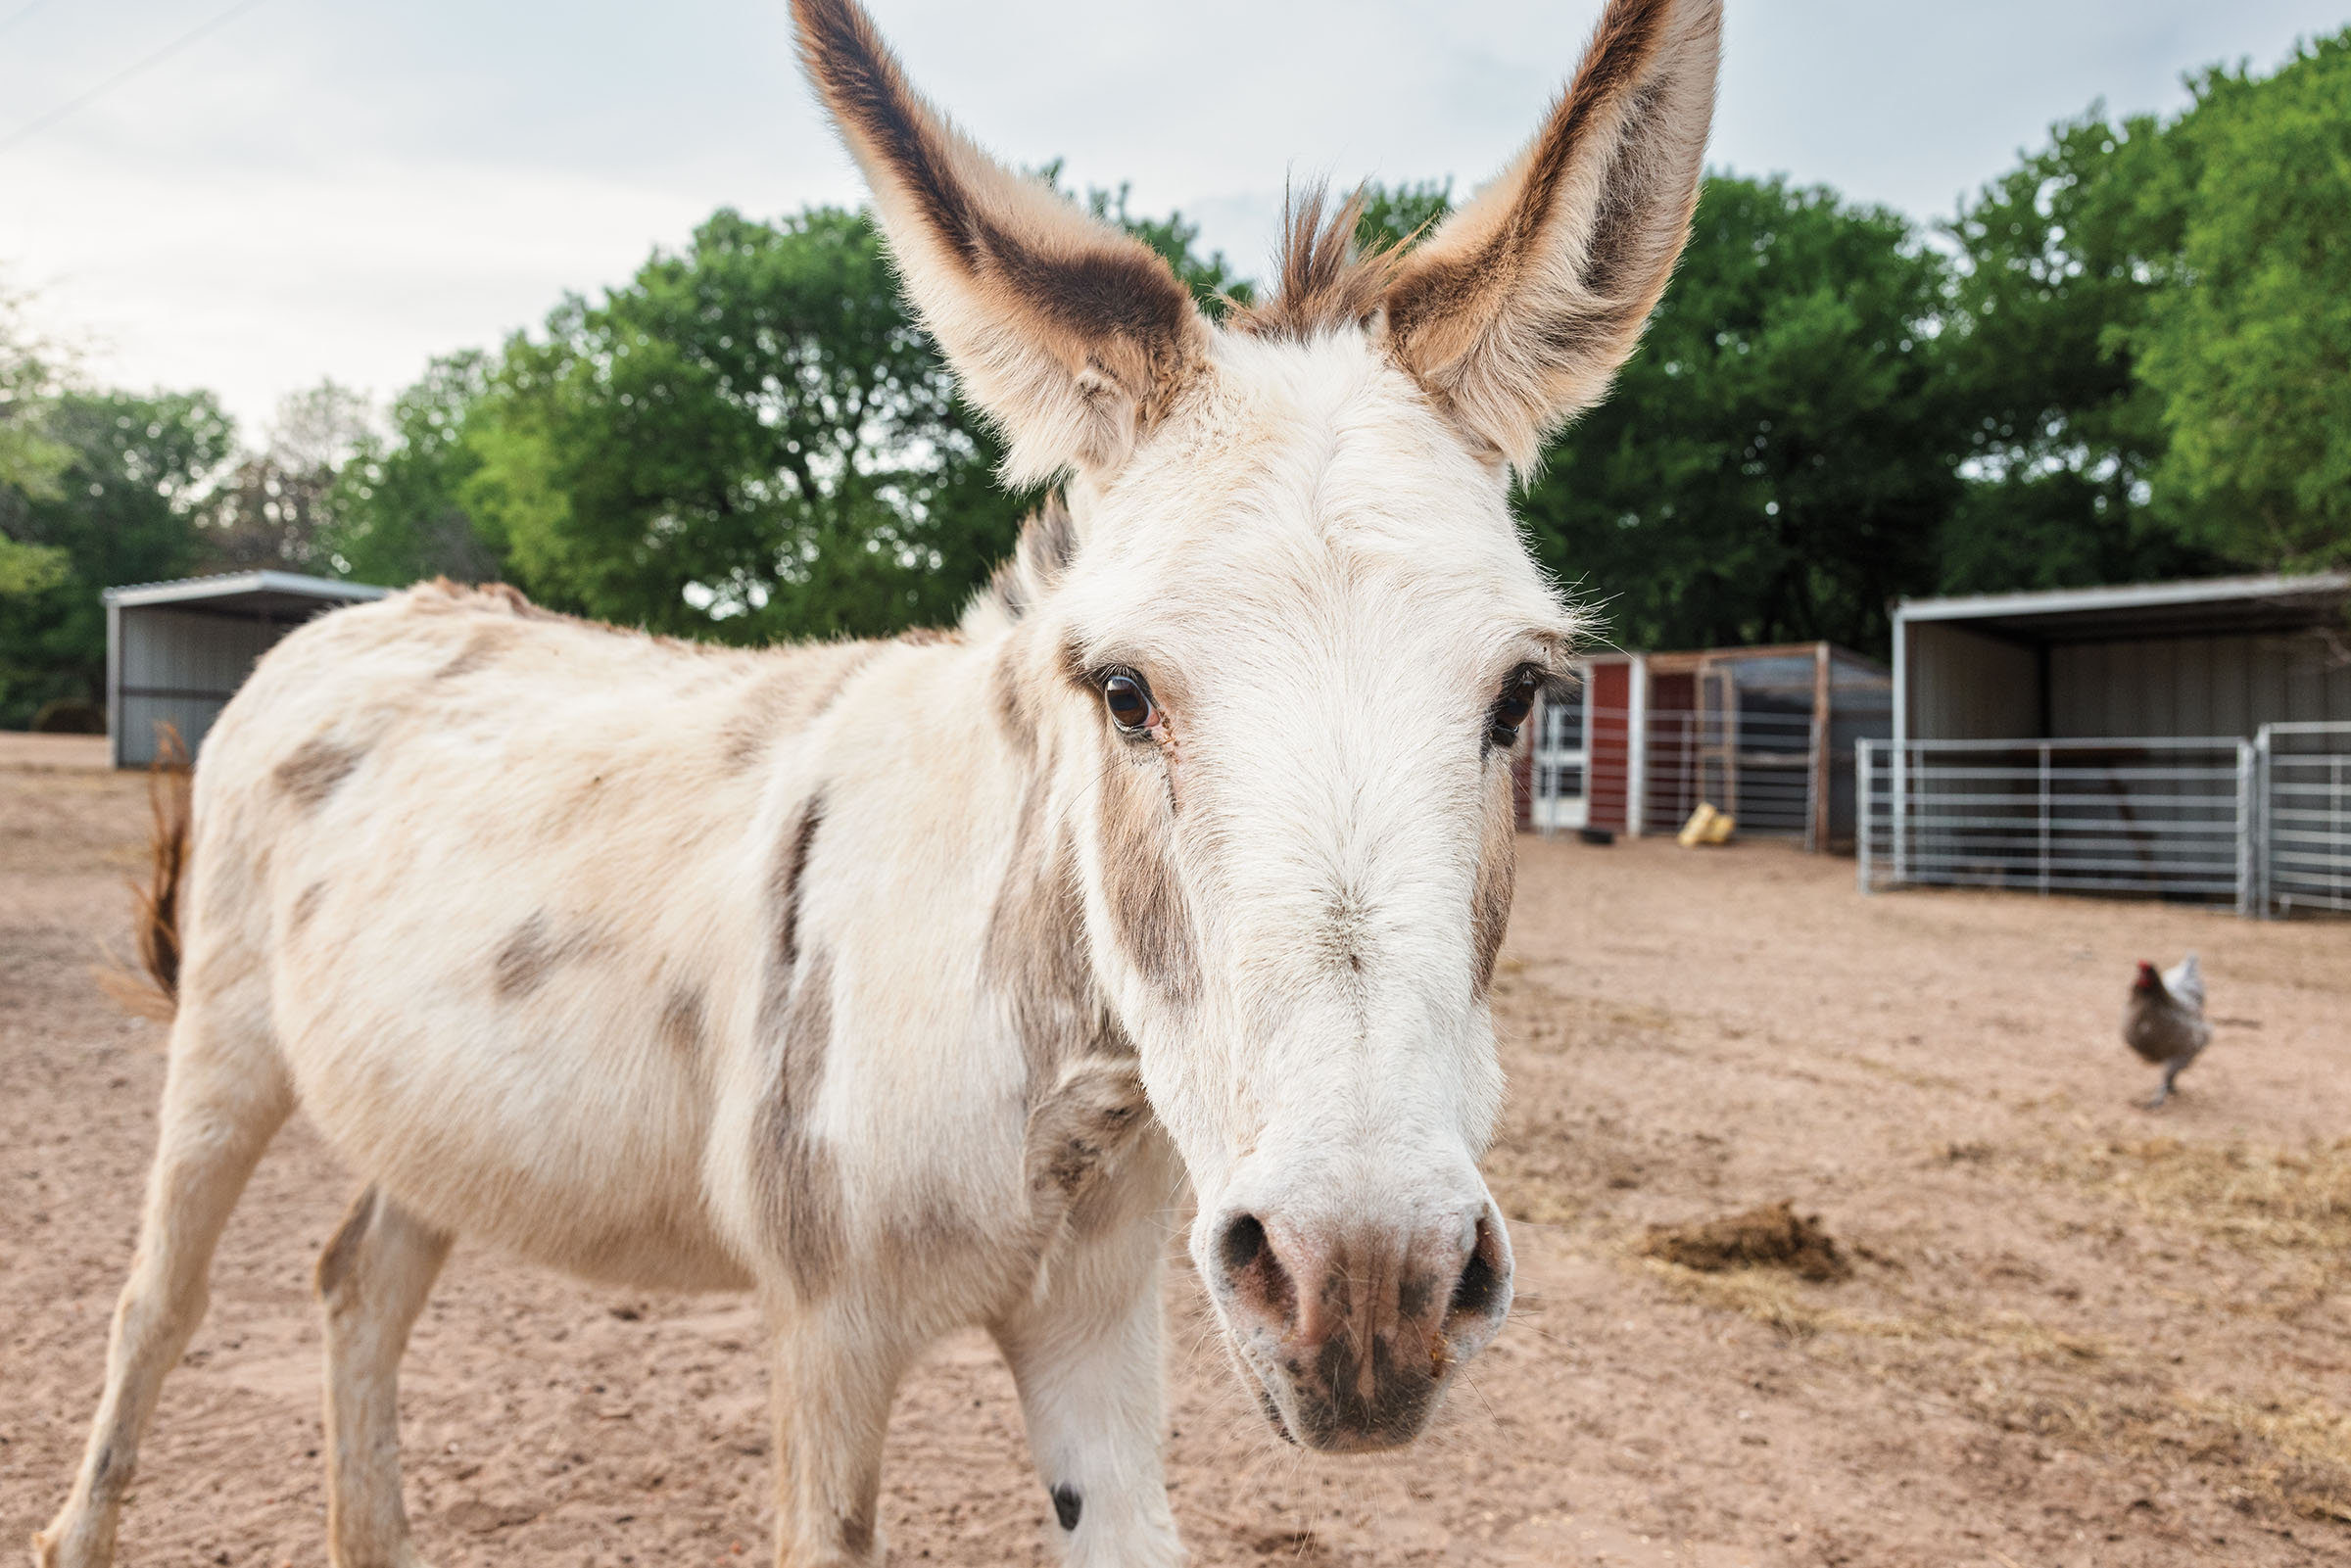 A white-haired mule stares at the camera in a dirt-floored barnyard